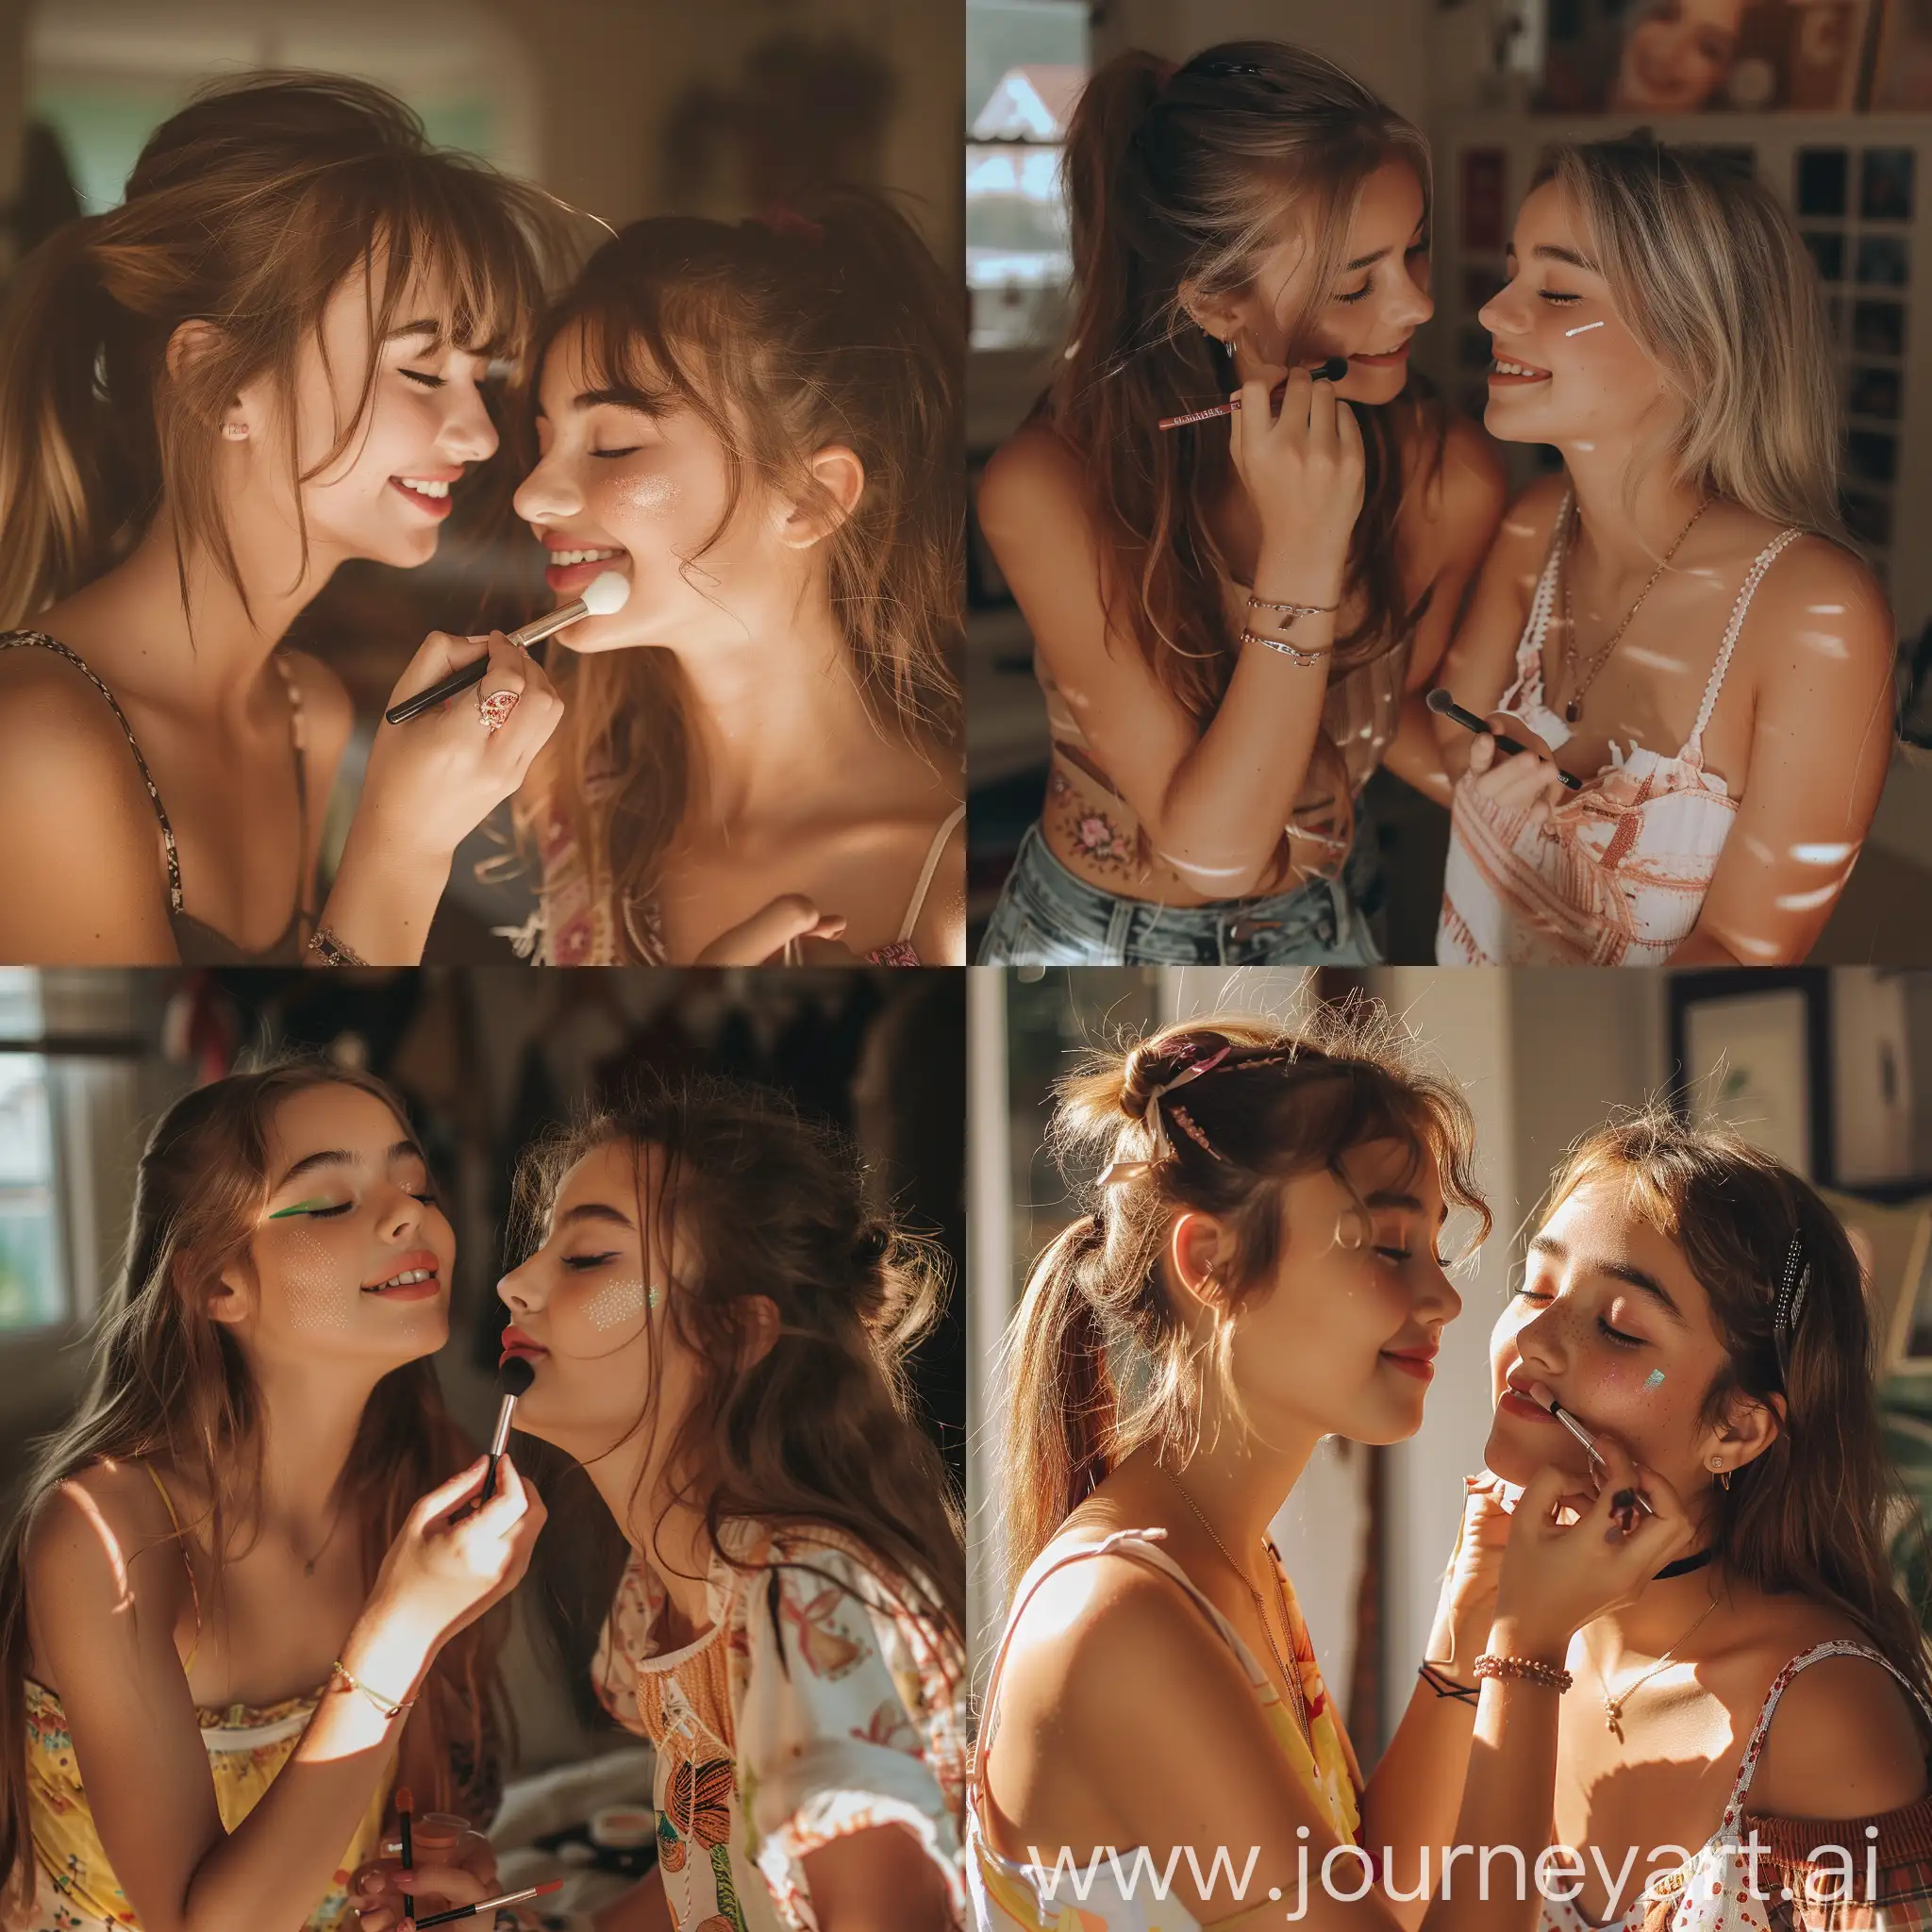 Two 18 year old girls doing each other's makeup, happy, cute trendy clothes, warm summer tones, Instagram filter close photo shot